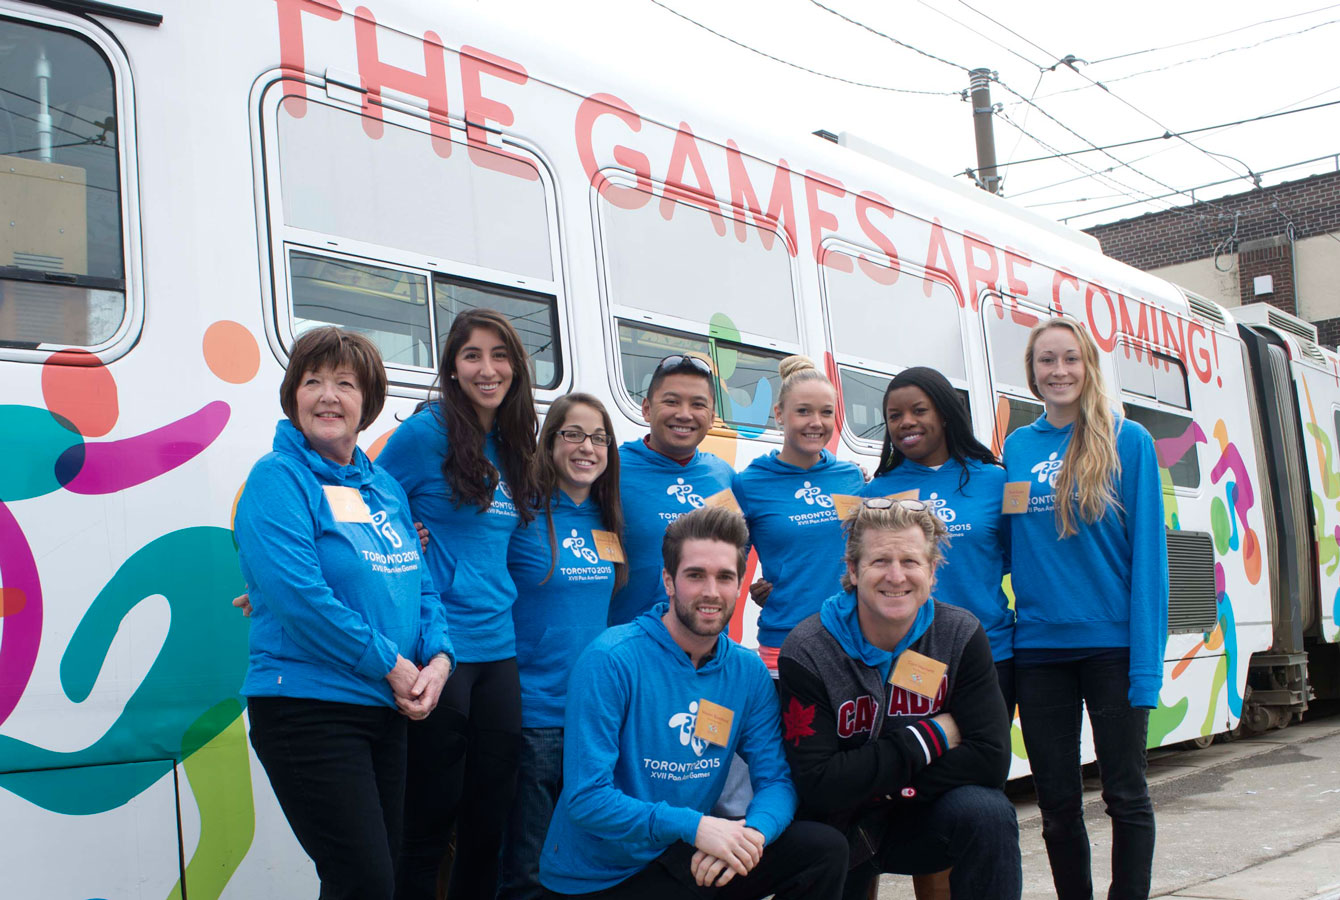 Athletes took to the special Pan American Games-wrapped 501 streetcar on the Queen Street route to promote Toronto 2015. 